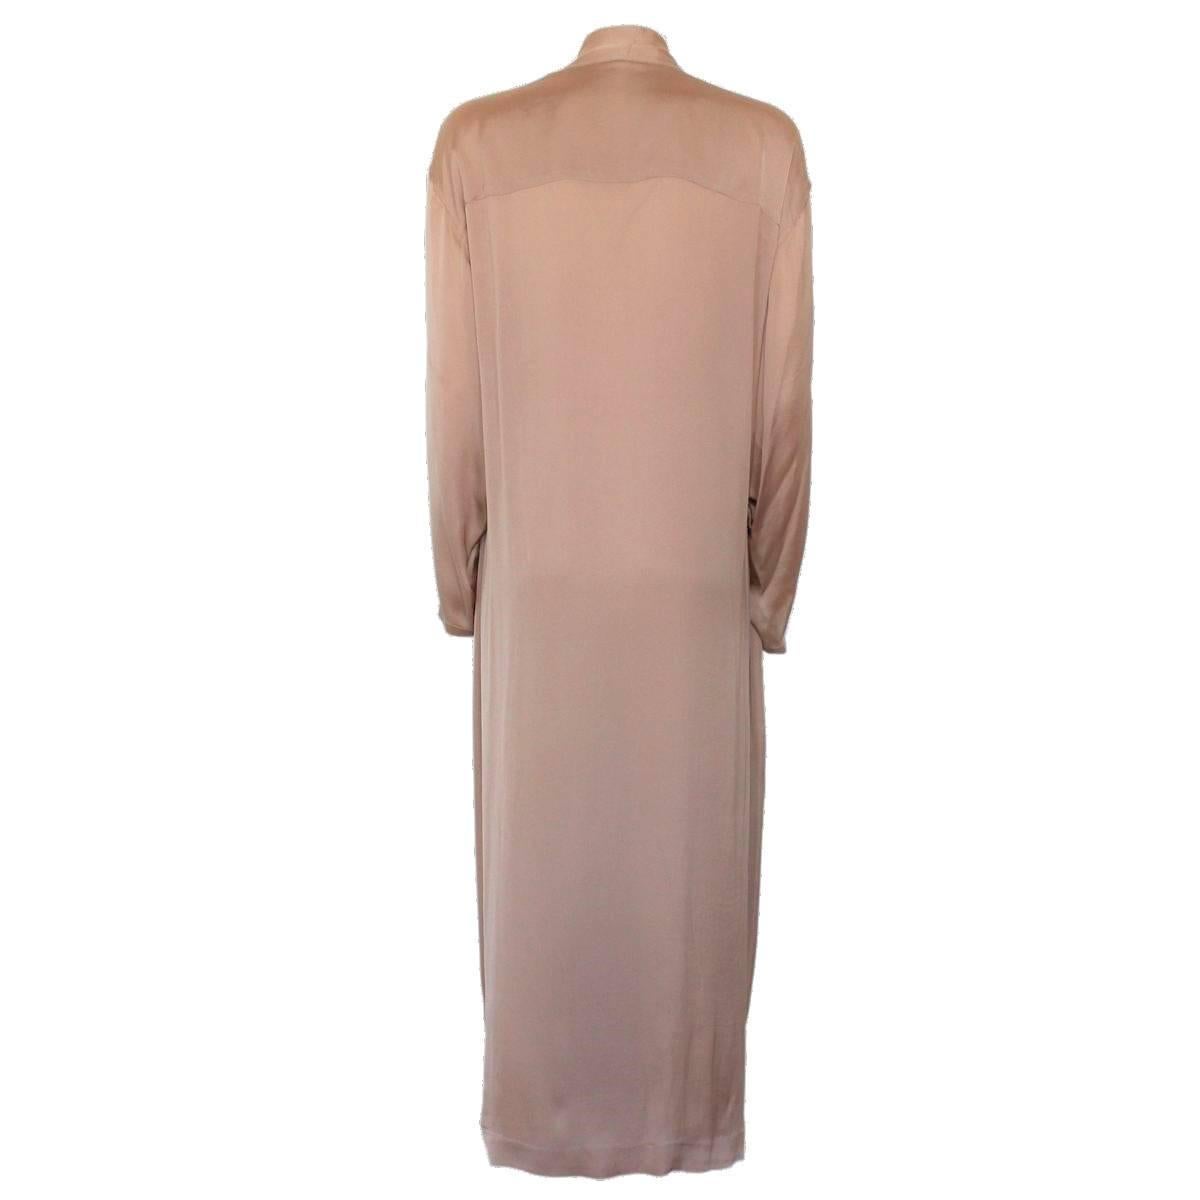 So beautiful dress by Stella Mccartney !
Evening long dress
100% Silk
Sand color
Long sleeve
Can be used with a belt
Length from shoulder cm 120 (47.2 inches)
Original price € 1400
Worldwide express shipping included in the price !